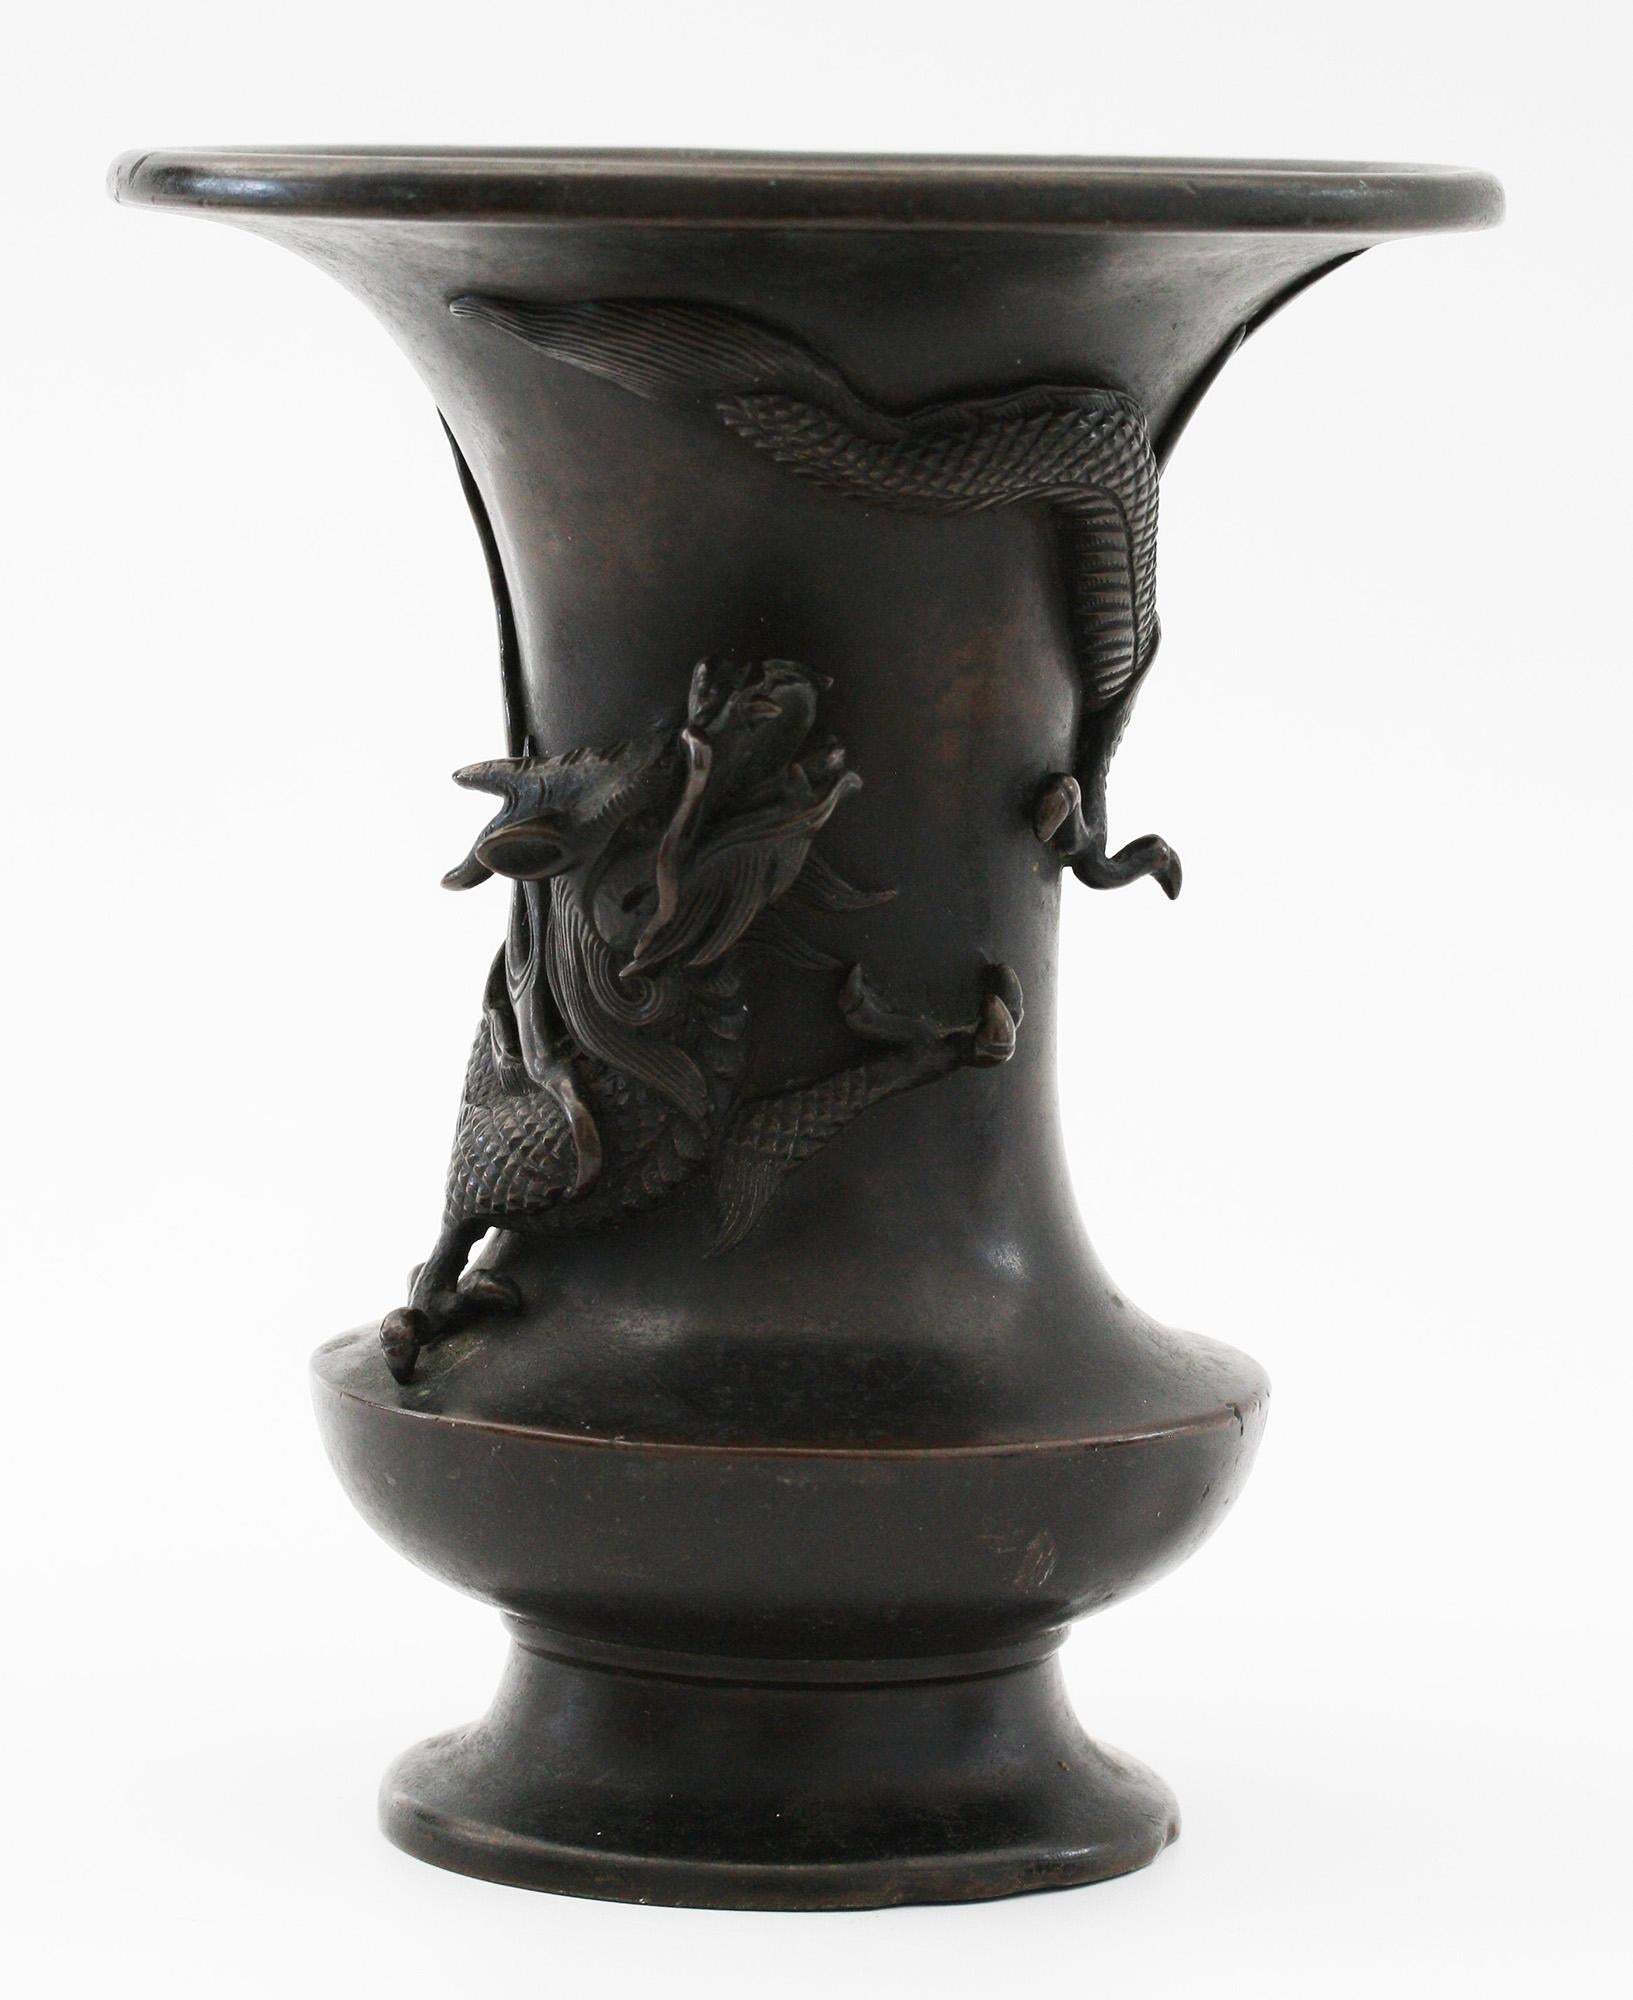 A stunning antique Japanese late Edo or early Meiji period campana shaped bronze vase applied with a scrolling dragon believed to date from the Edo or early Meiji period. The vase is well executed and heavily made with superb craftsmanship and